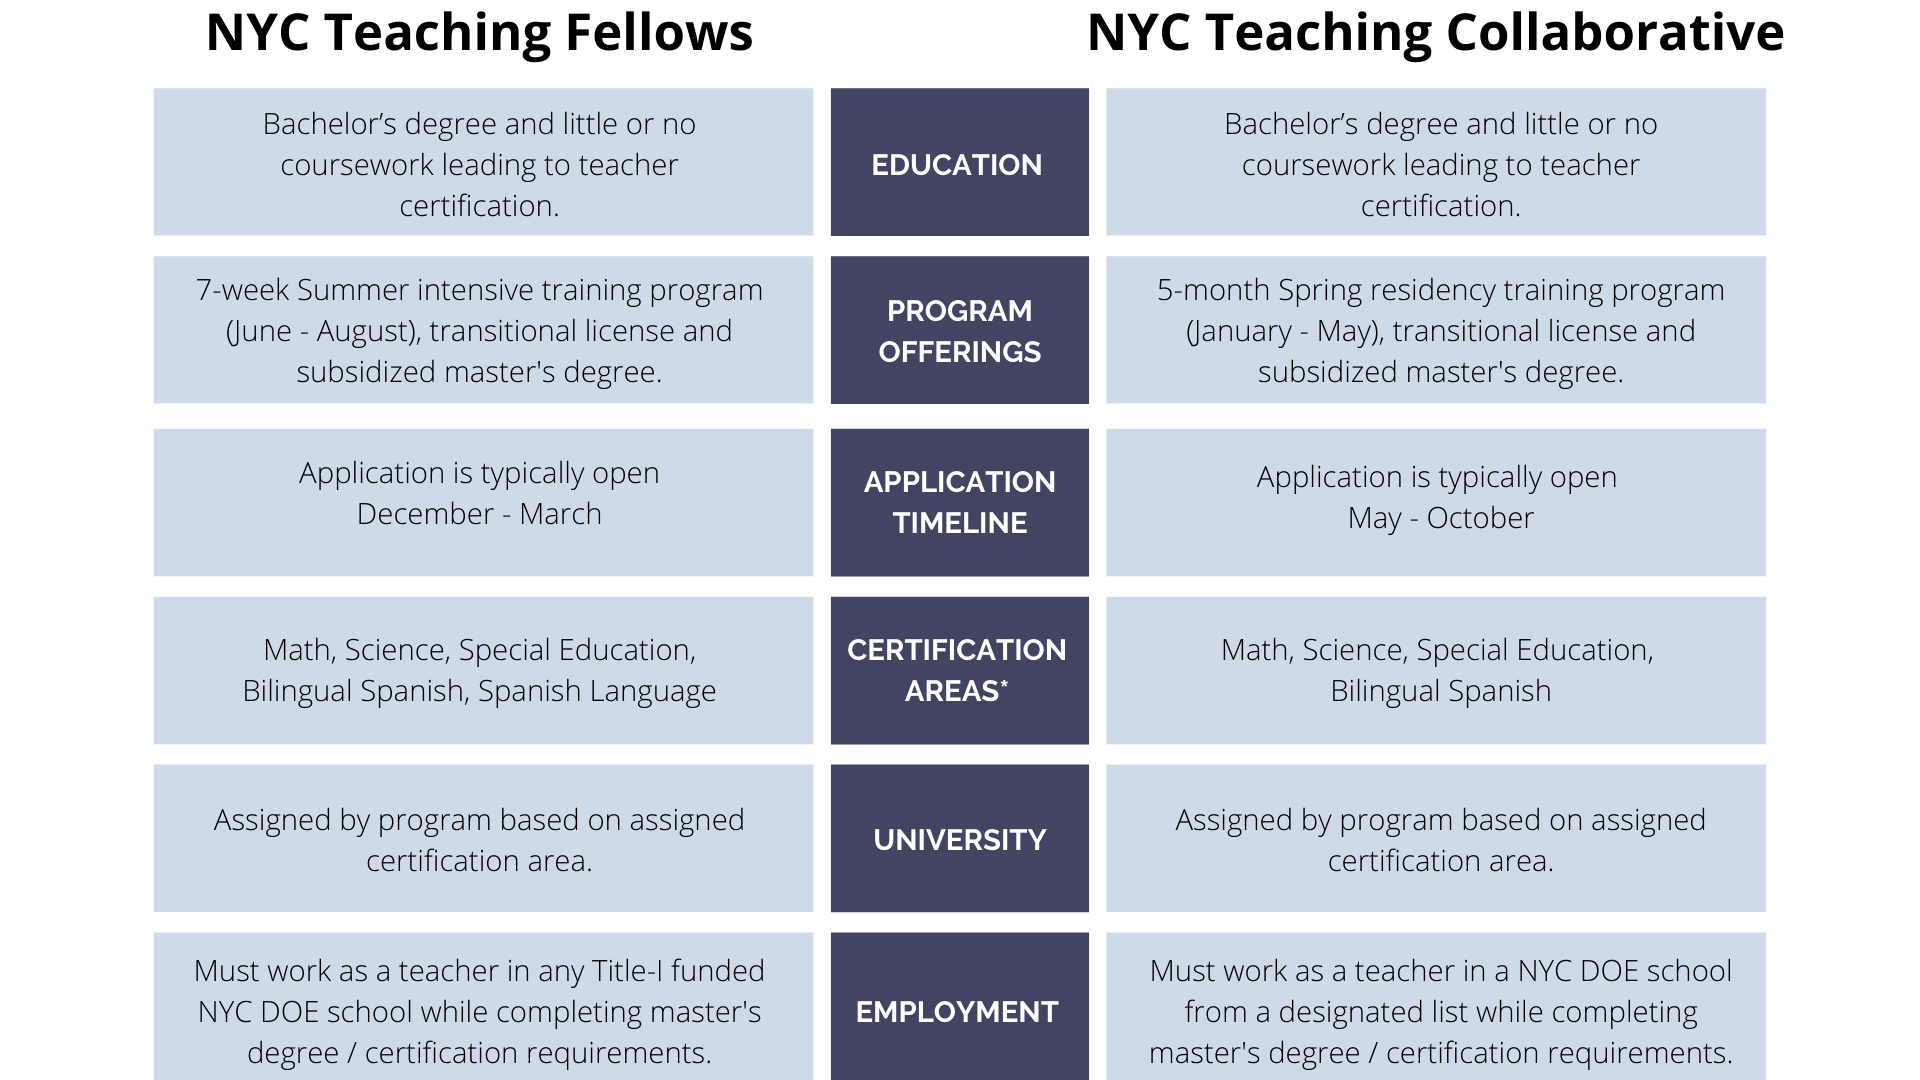 What is the difference between the NYC Teaching Fellows and the NYC